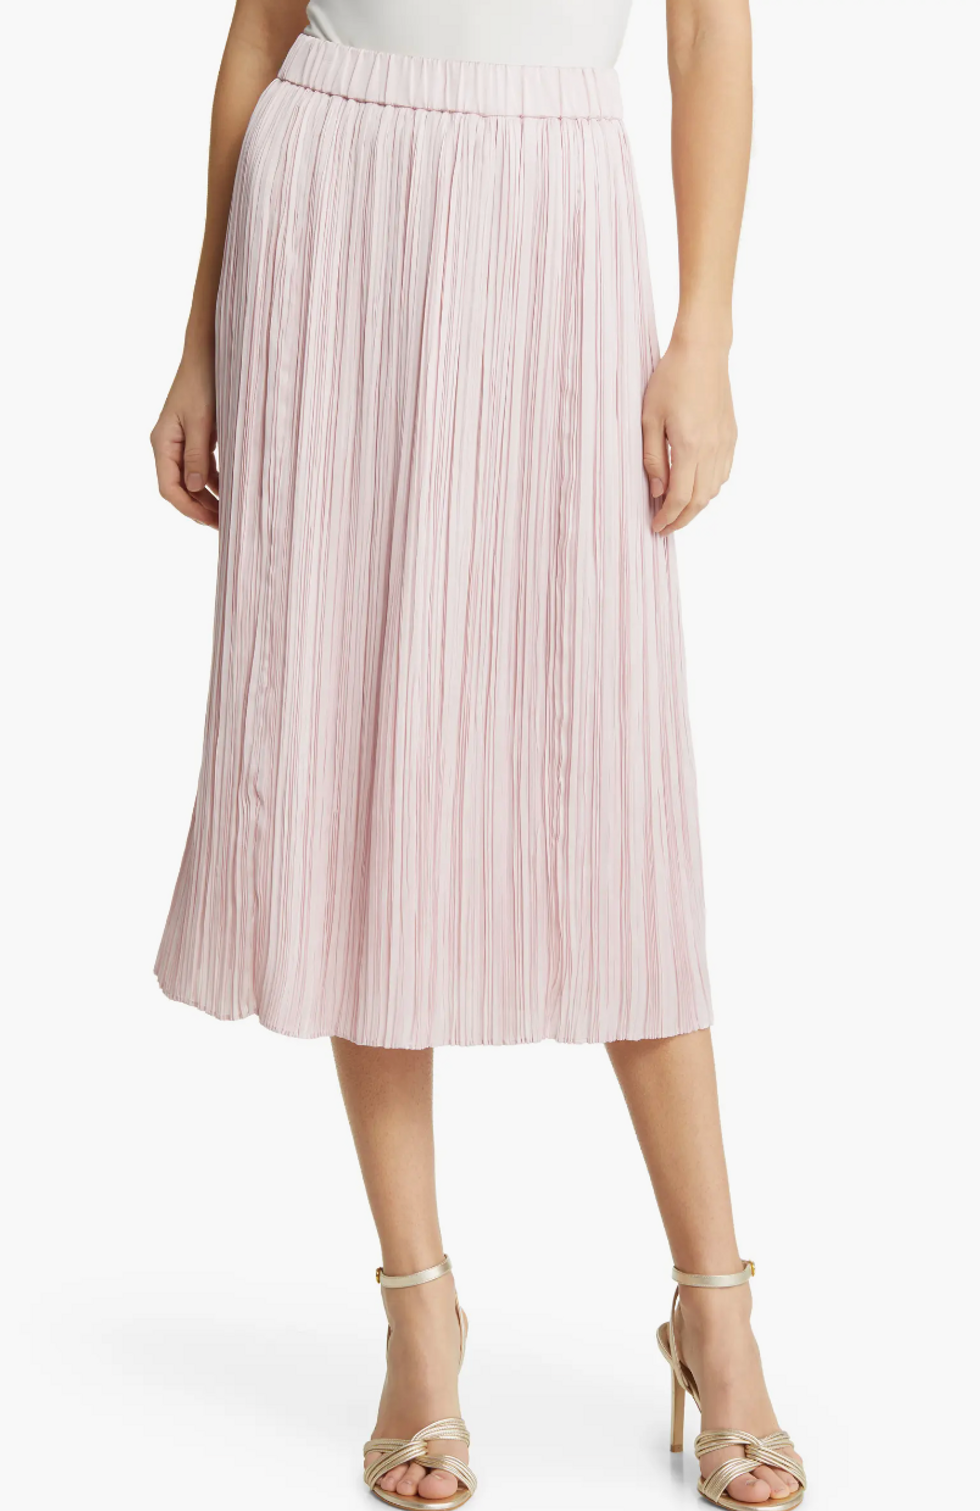 Nordstrom Micropleat Midi Skirt in Pink Chalk